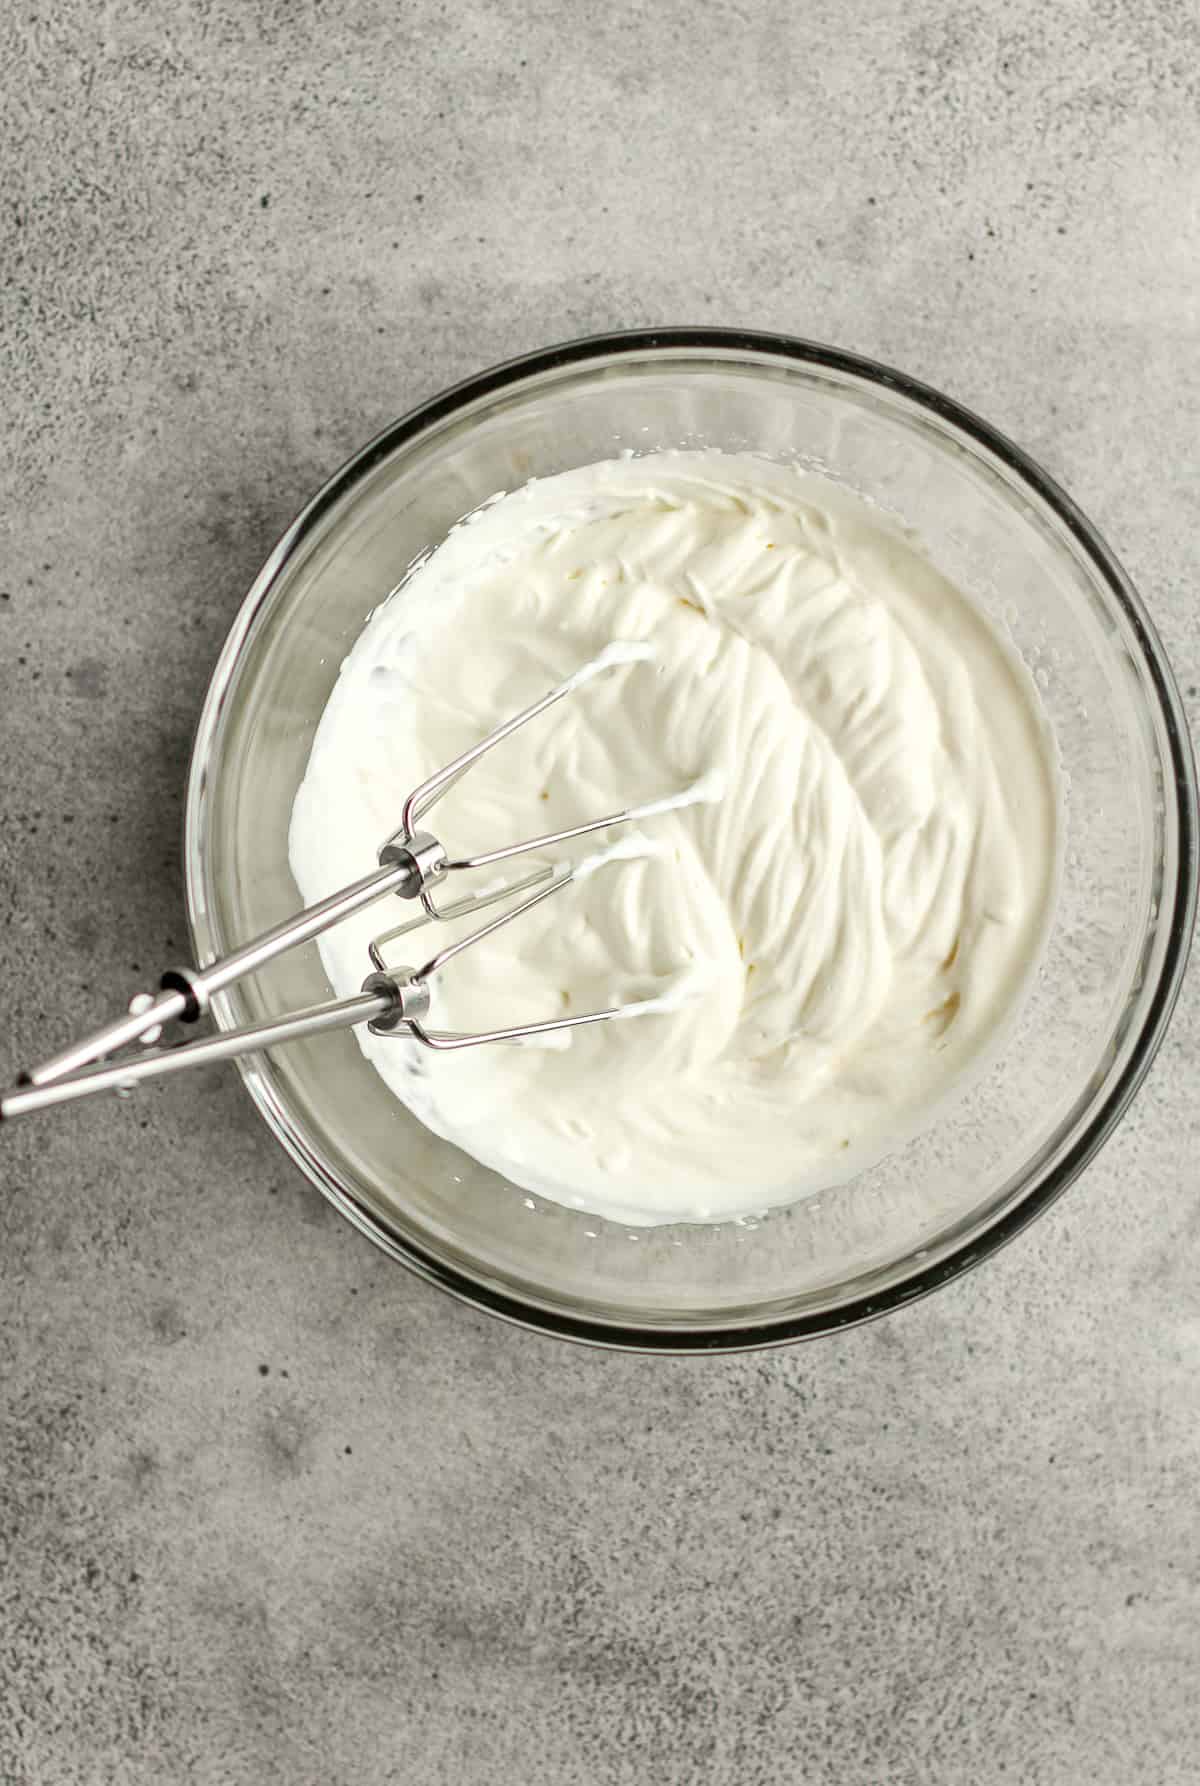 A bowl of the whipped heavy cream.